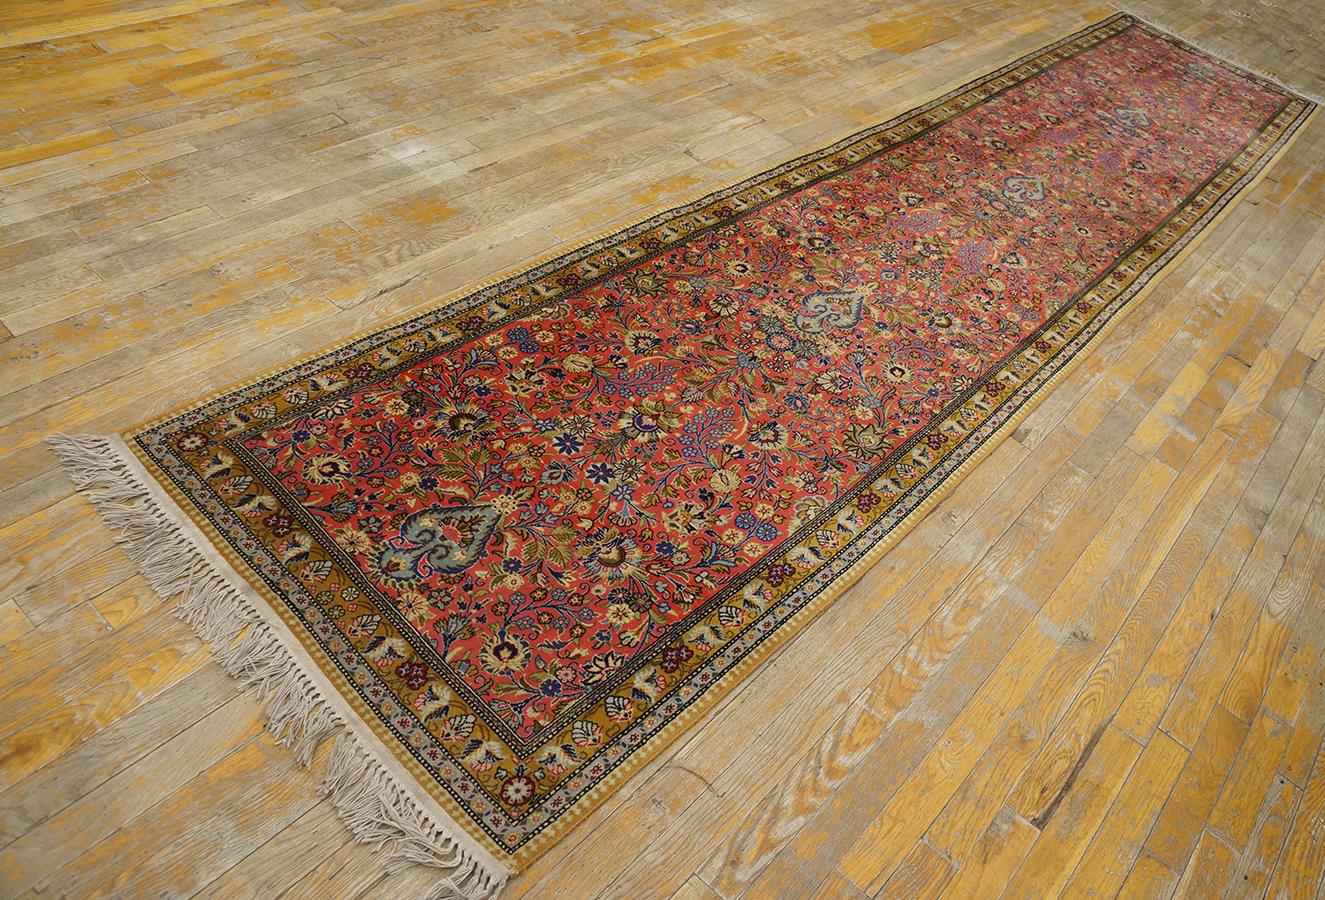 Hand-Knotted Antique Persian Tabriz Rug 2'10